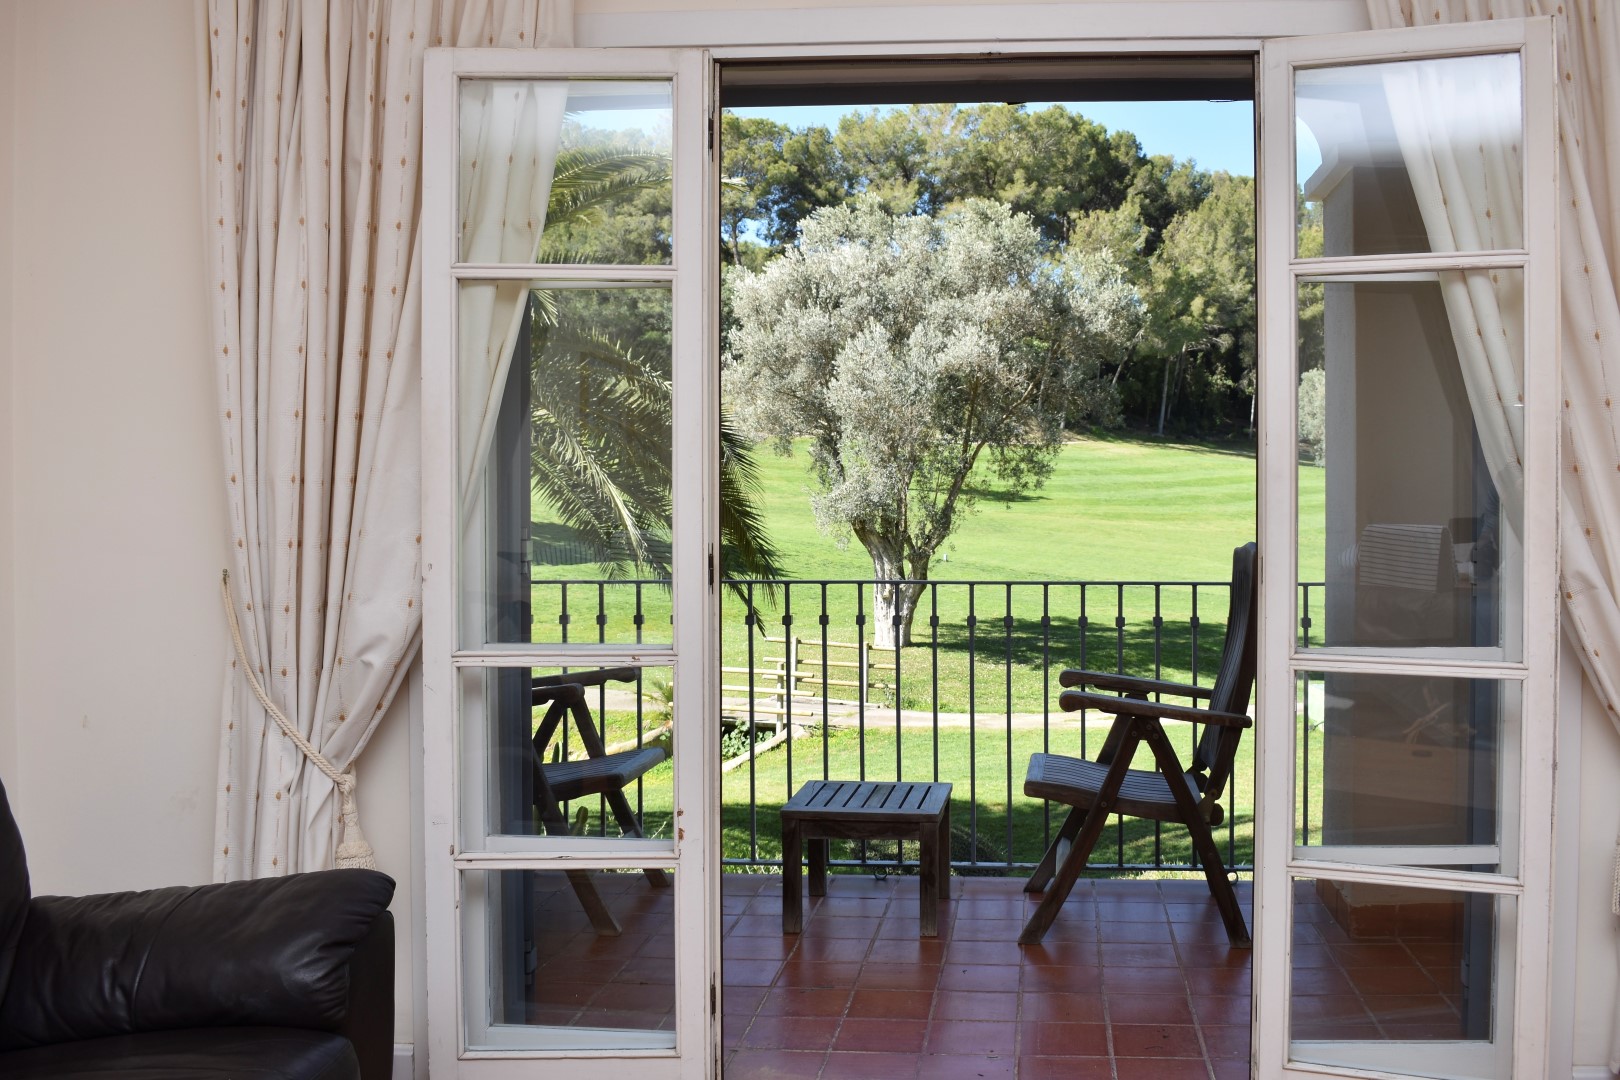 3 bed apartment with frontline golf course views